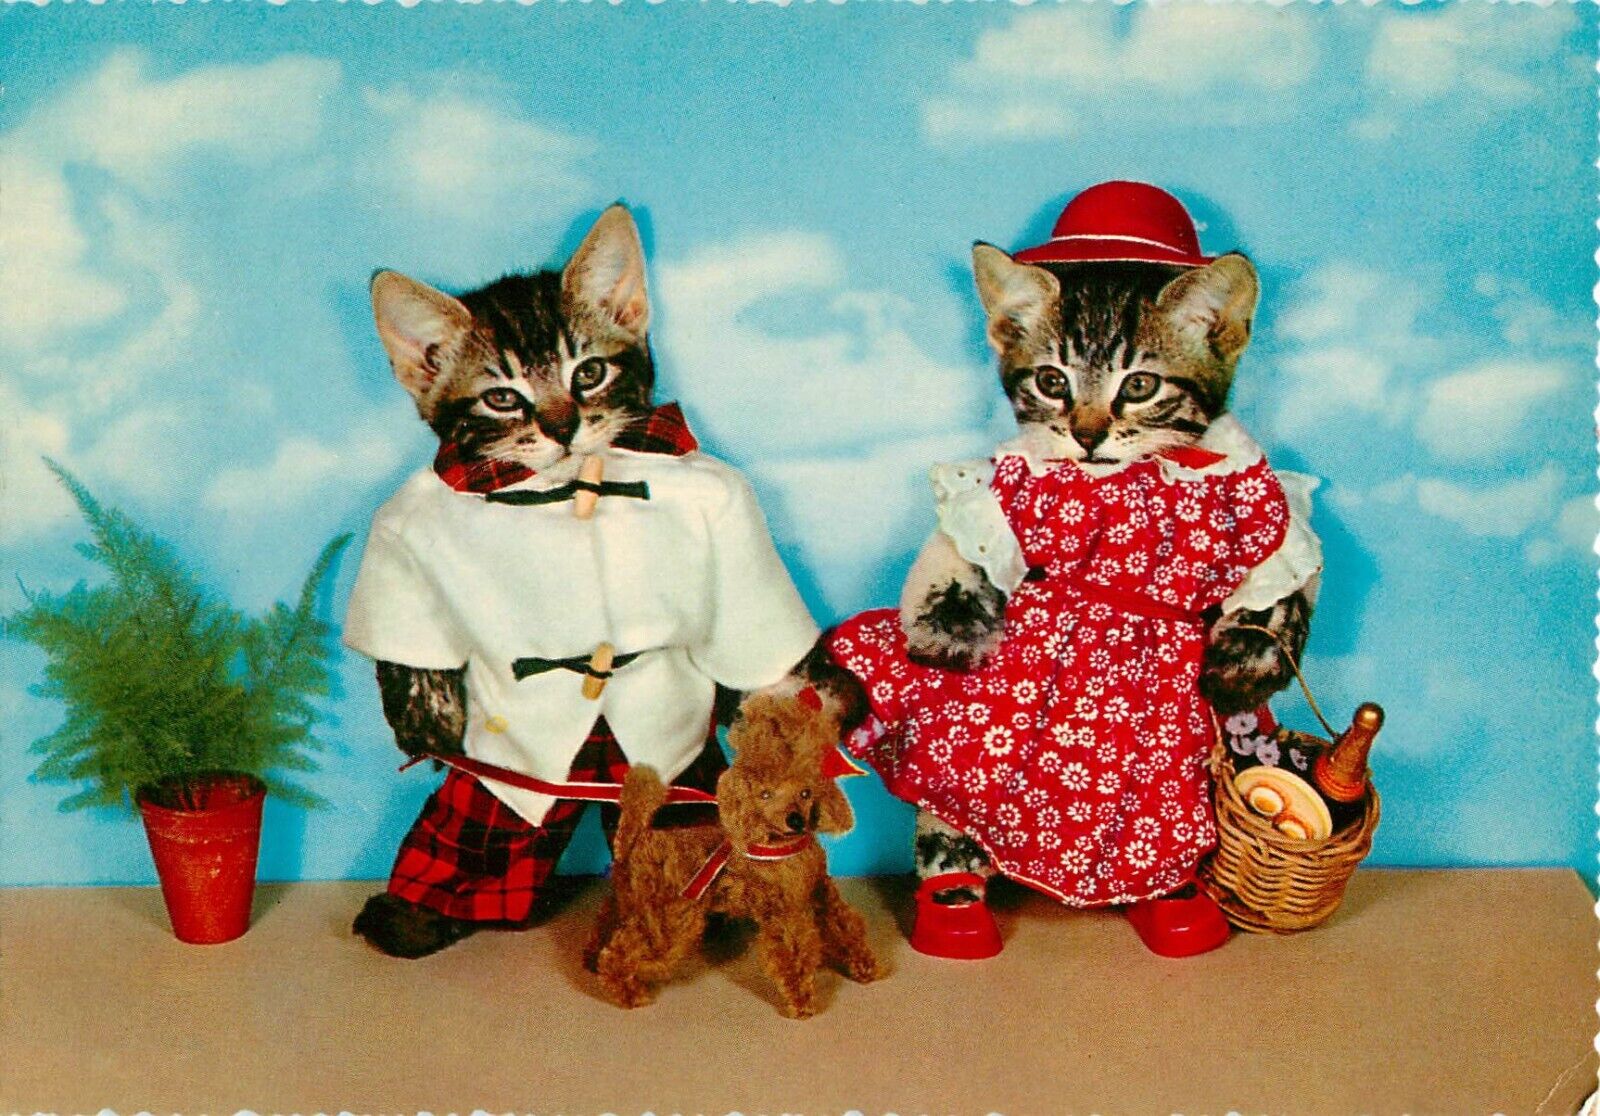 TWO CATS with Dog DOLLS FAIRY TALE Kruger, made in Western Germany POSTCARD, New